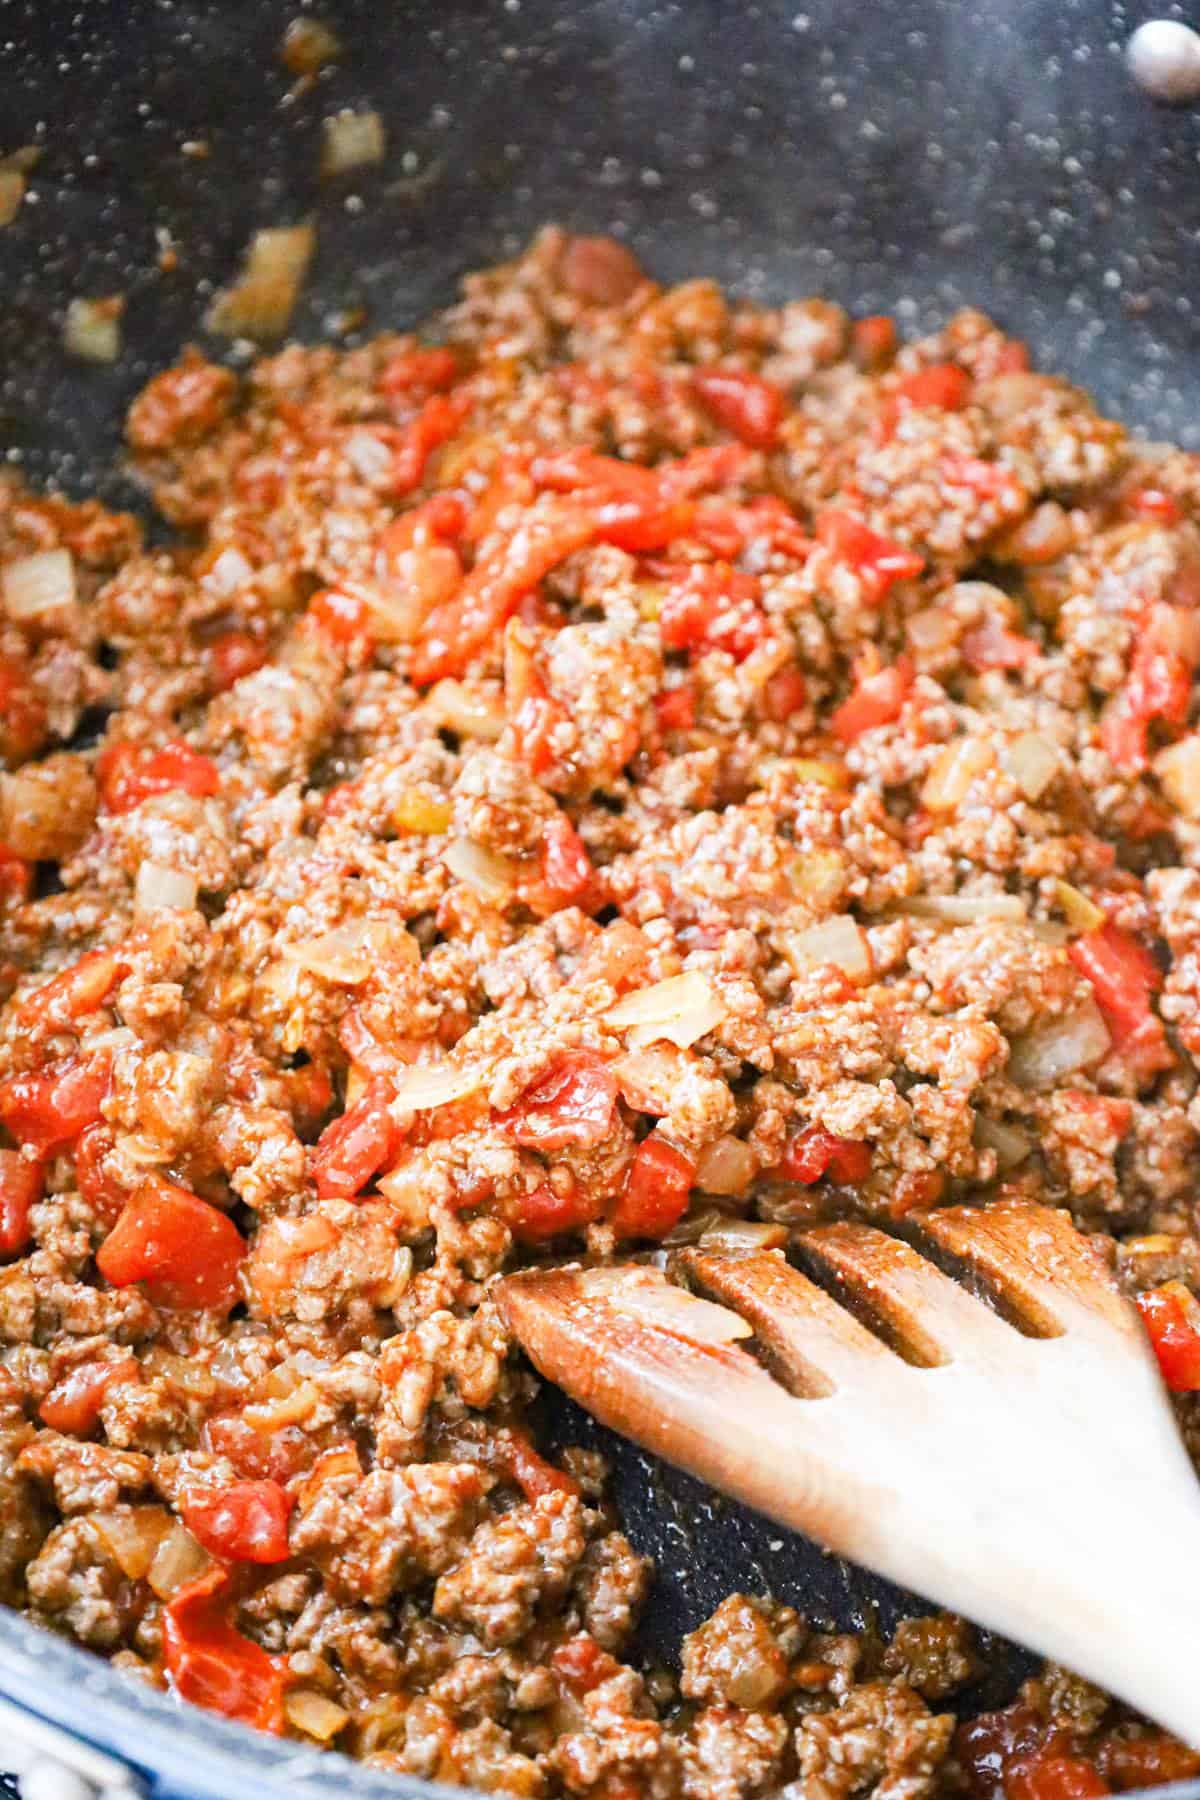 Rotel, taco seasoning and ground beef mixture in a saute pan